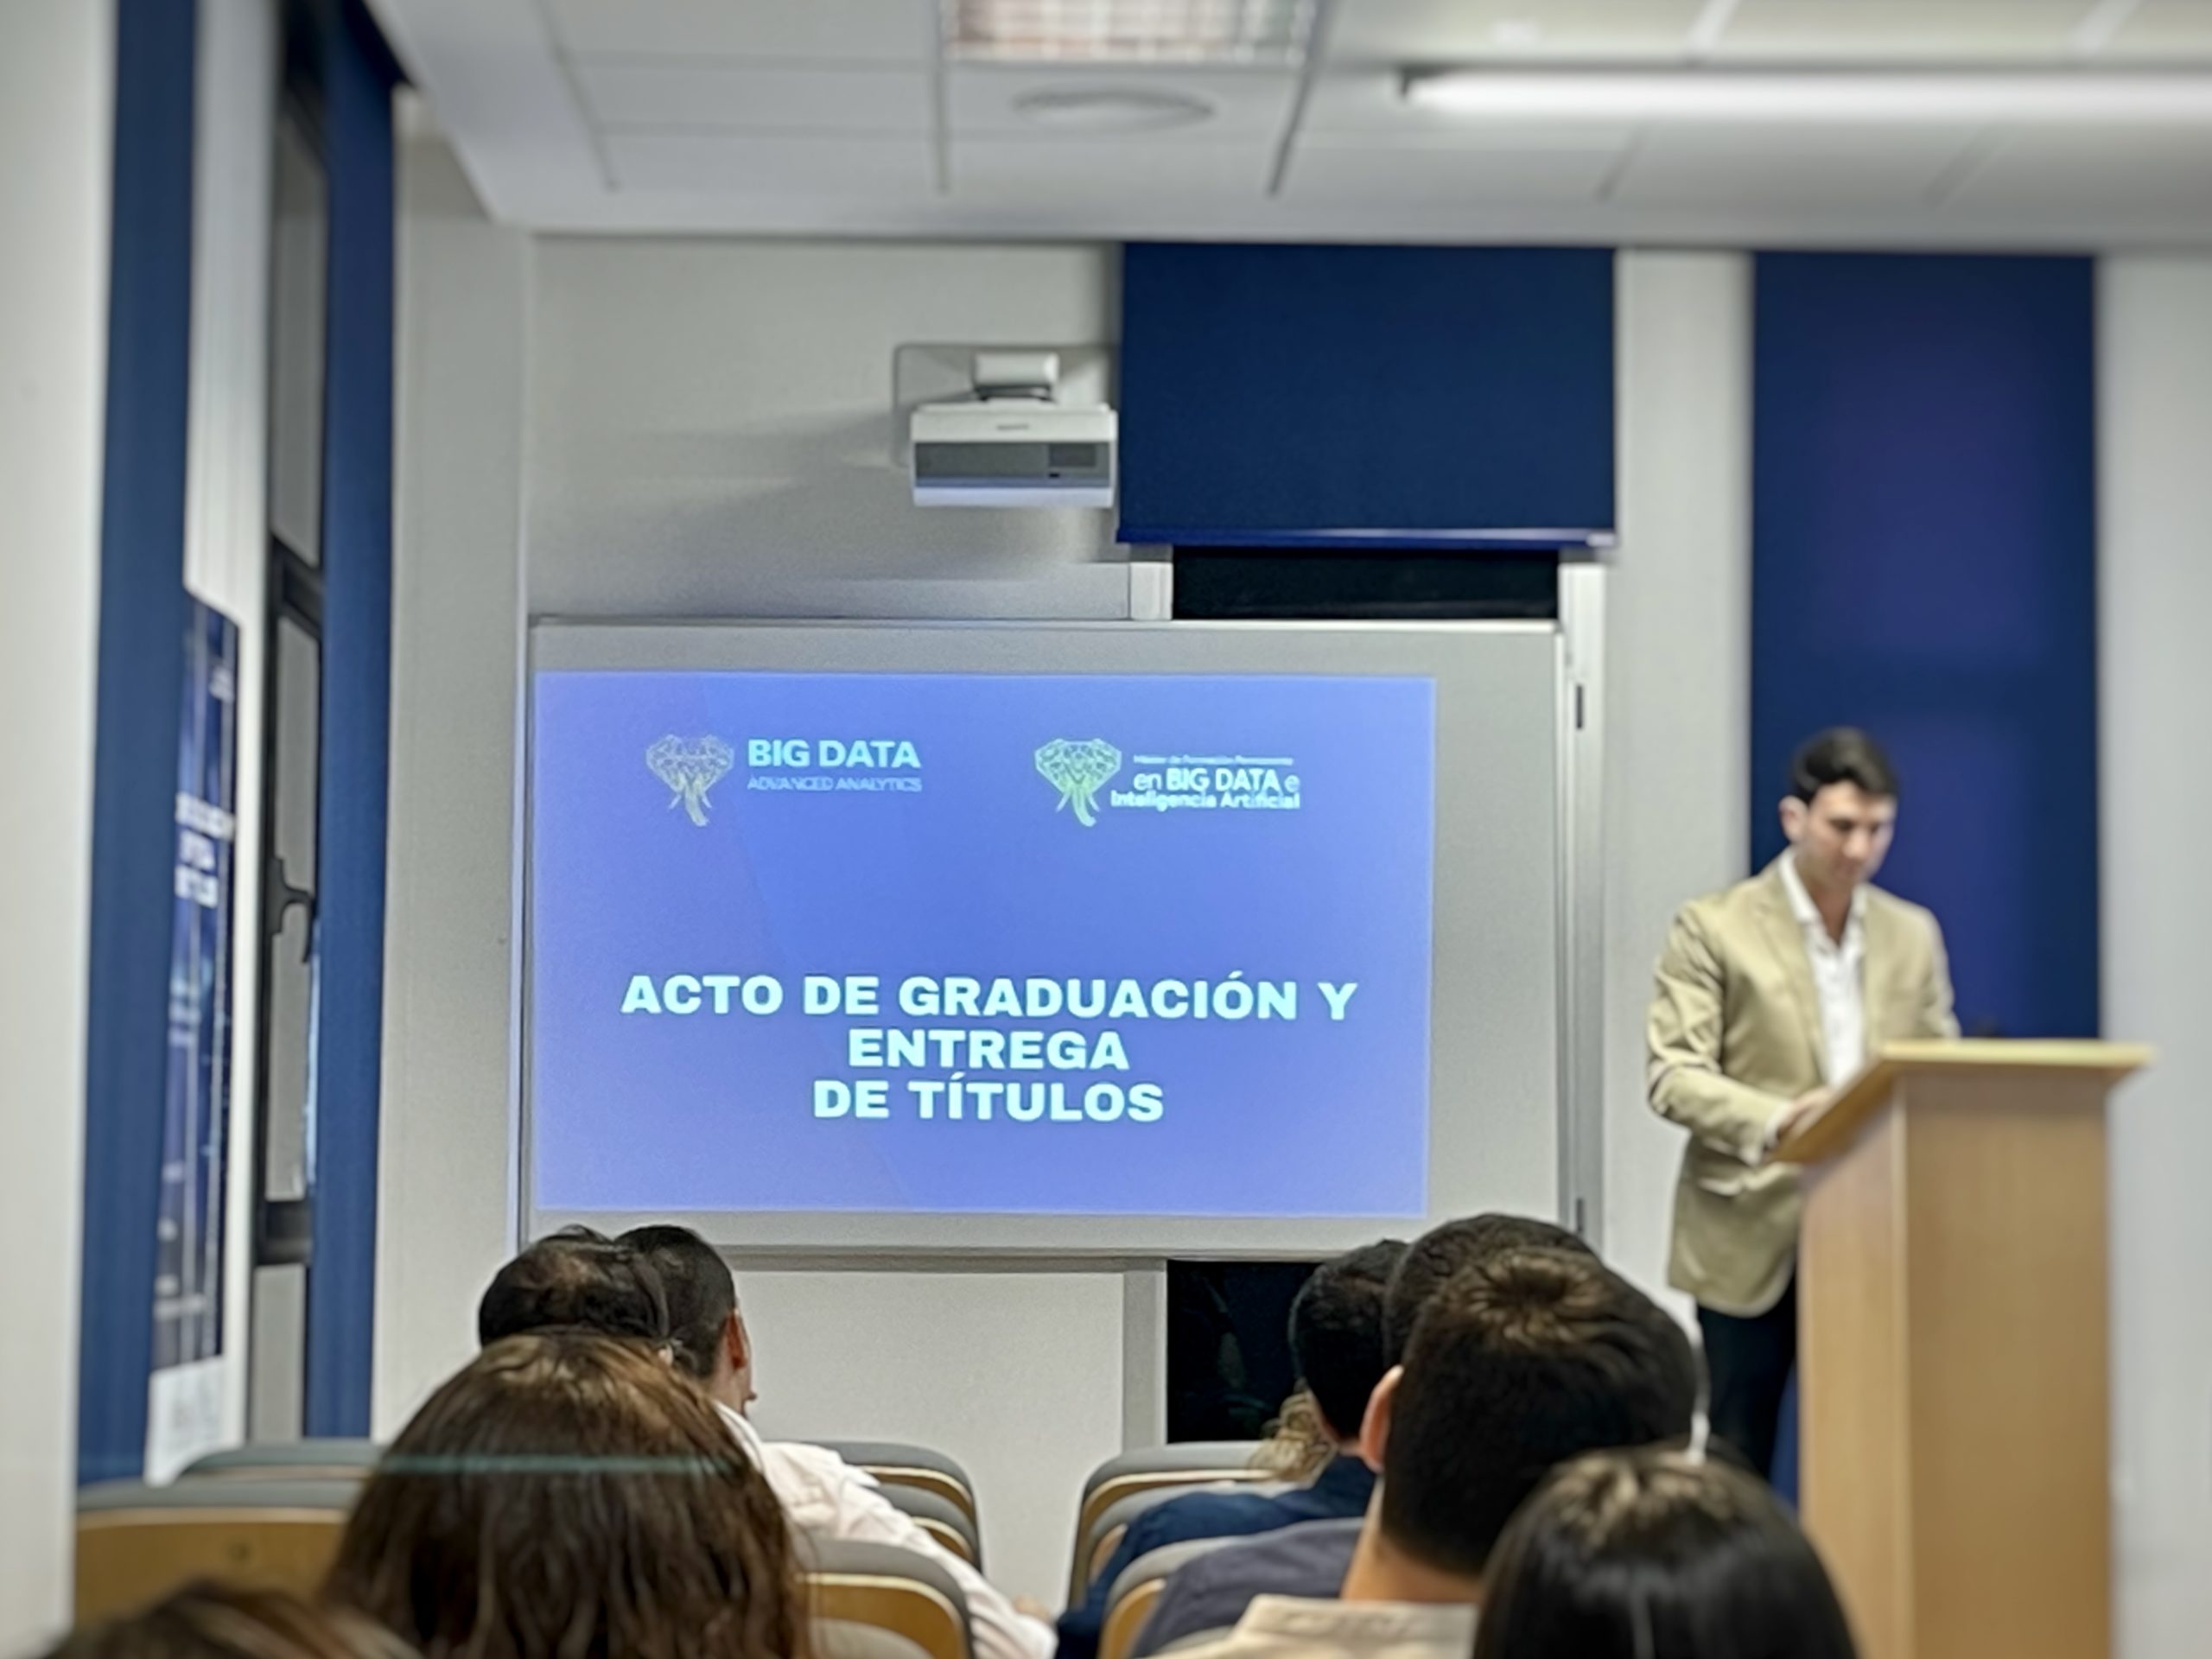 The graduation ceremony of degrees of the Master in Advanced Analytics on Big Data and the Master in Big Data and Intelligence are held